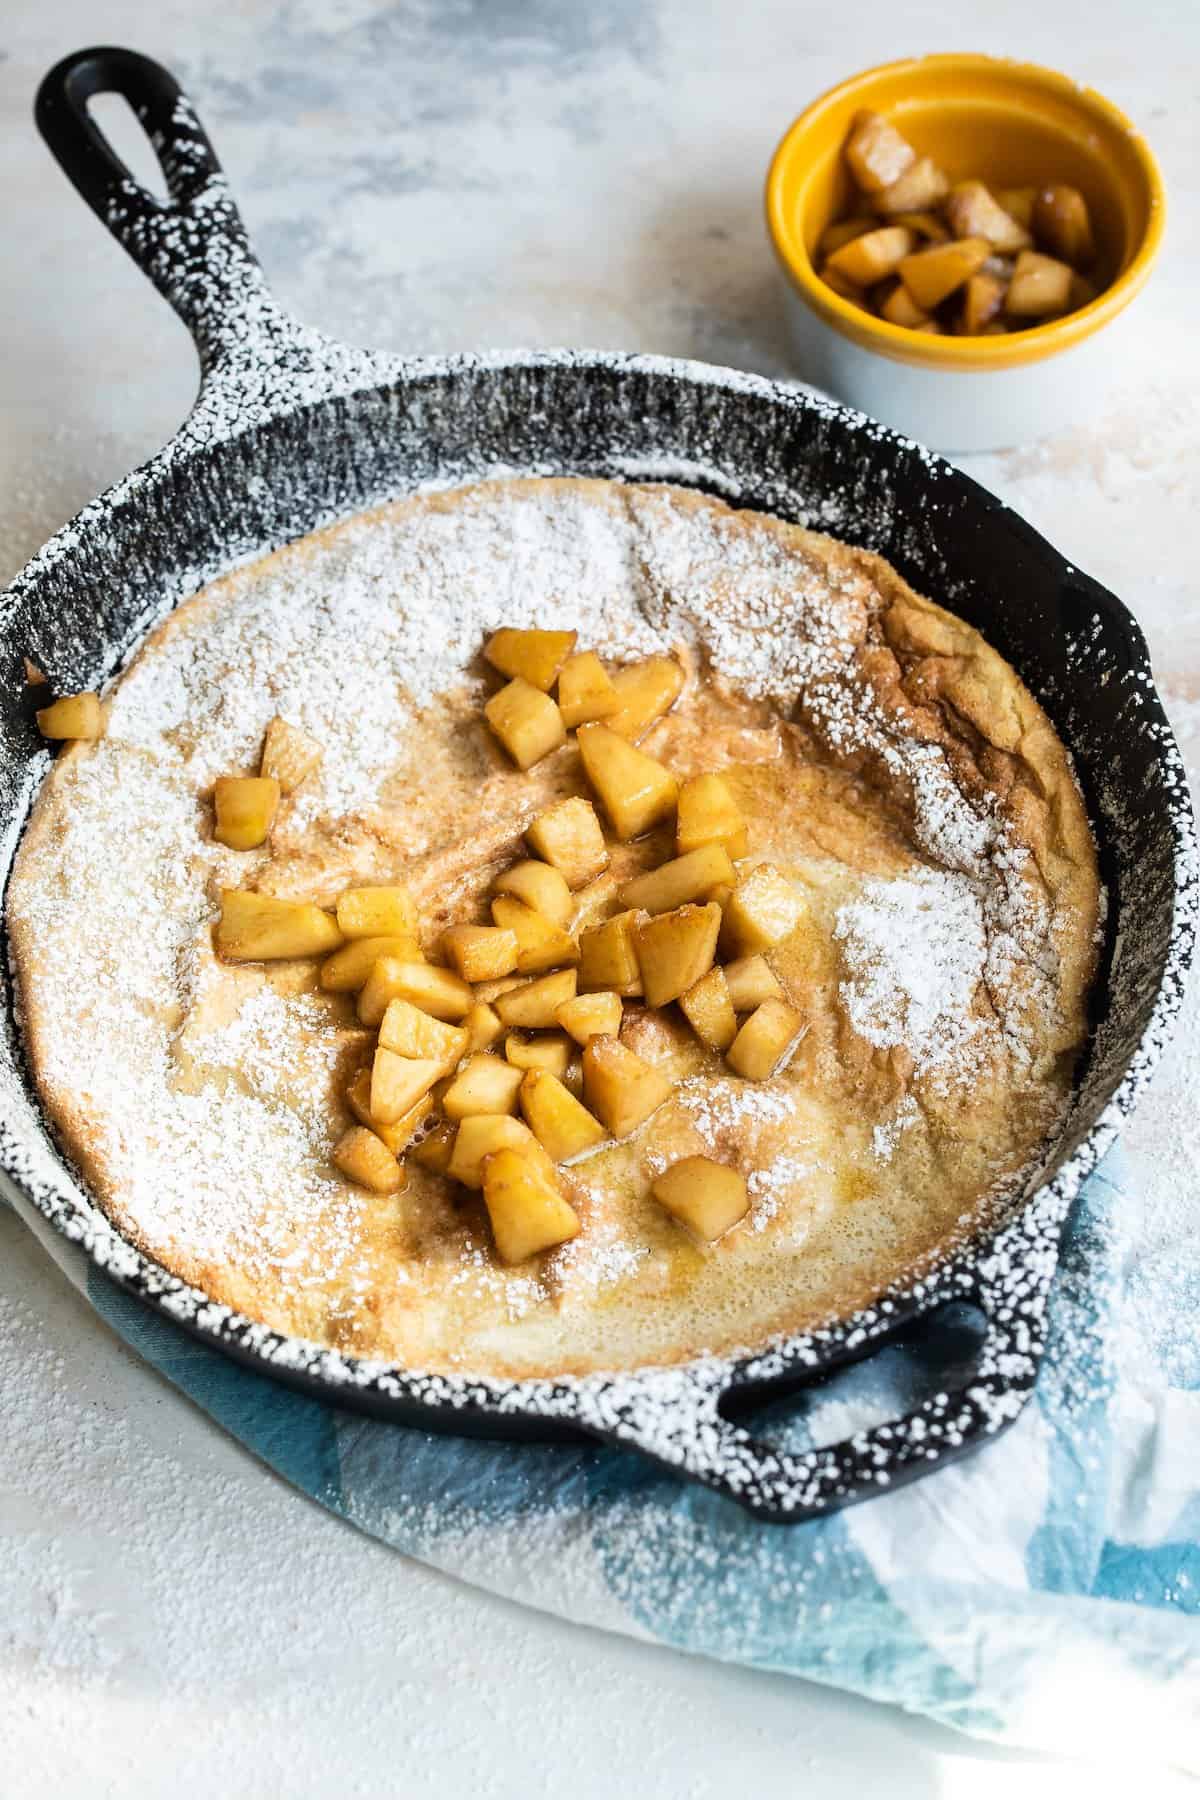 Puffed up Dutch baby pancake with fried apples.